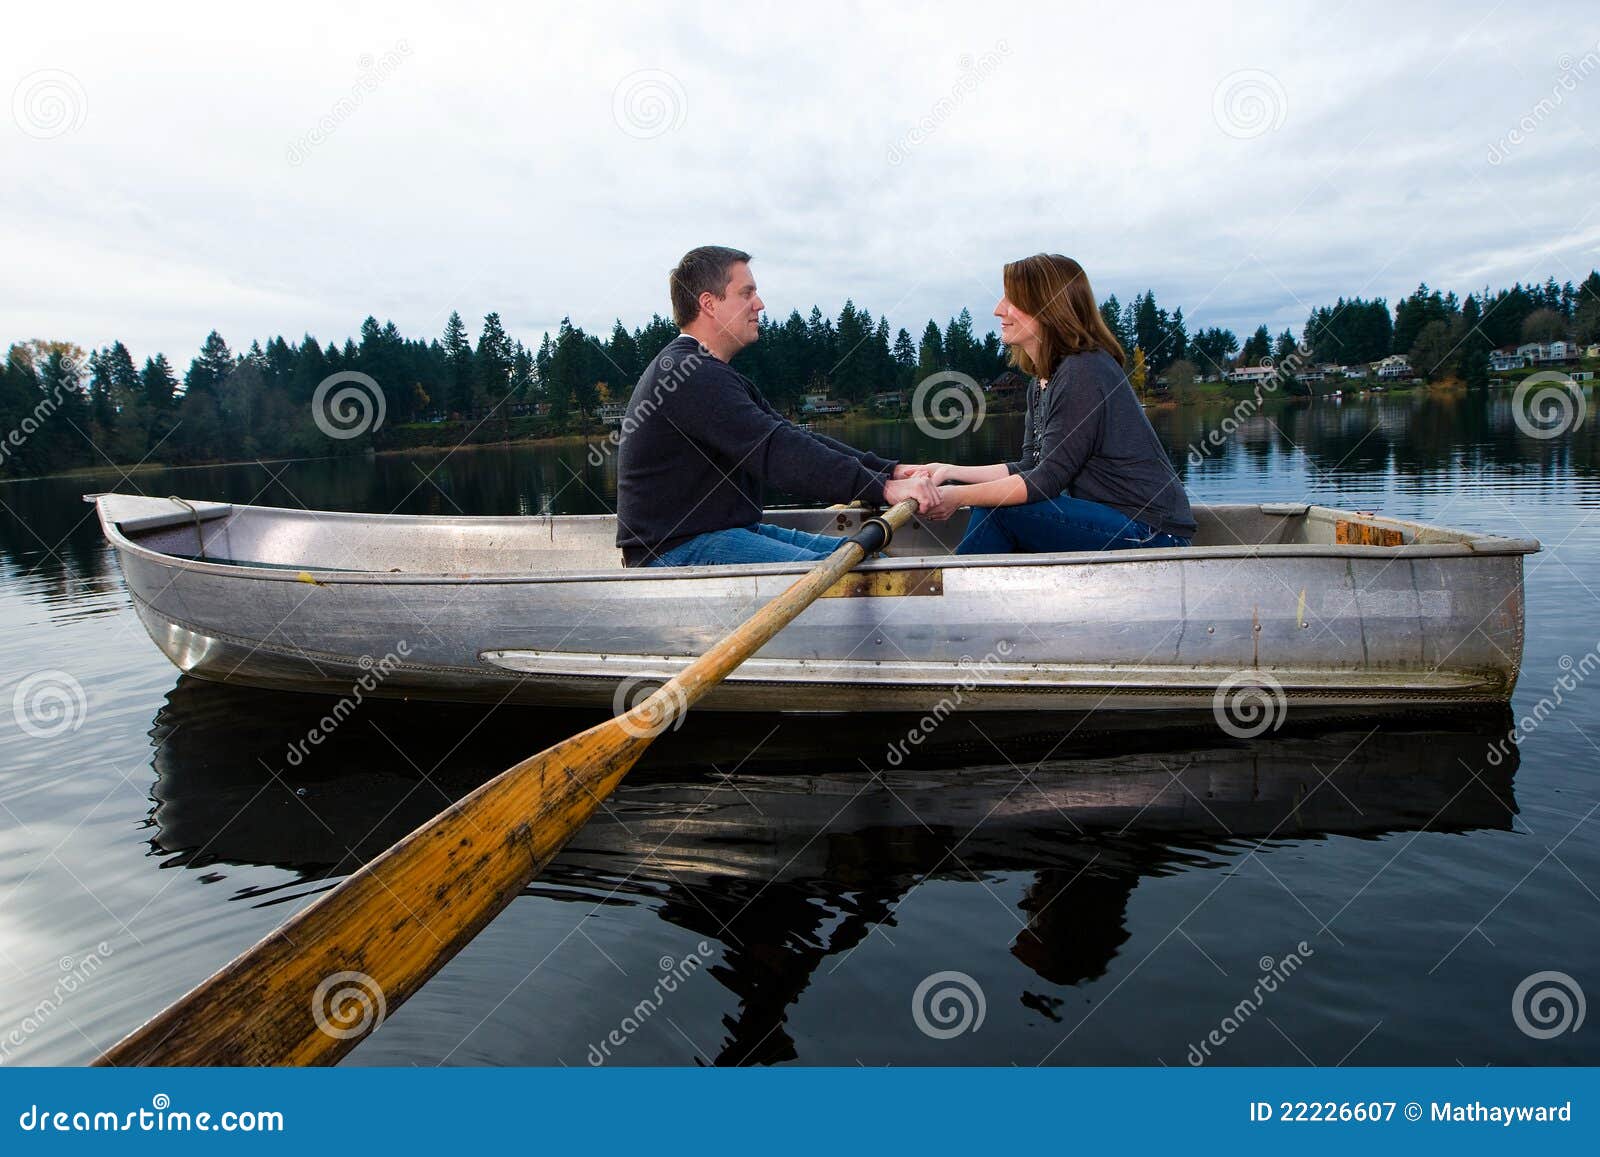 romantic date on a rowboat stock image. image of couple